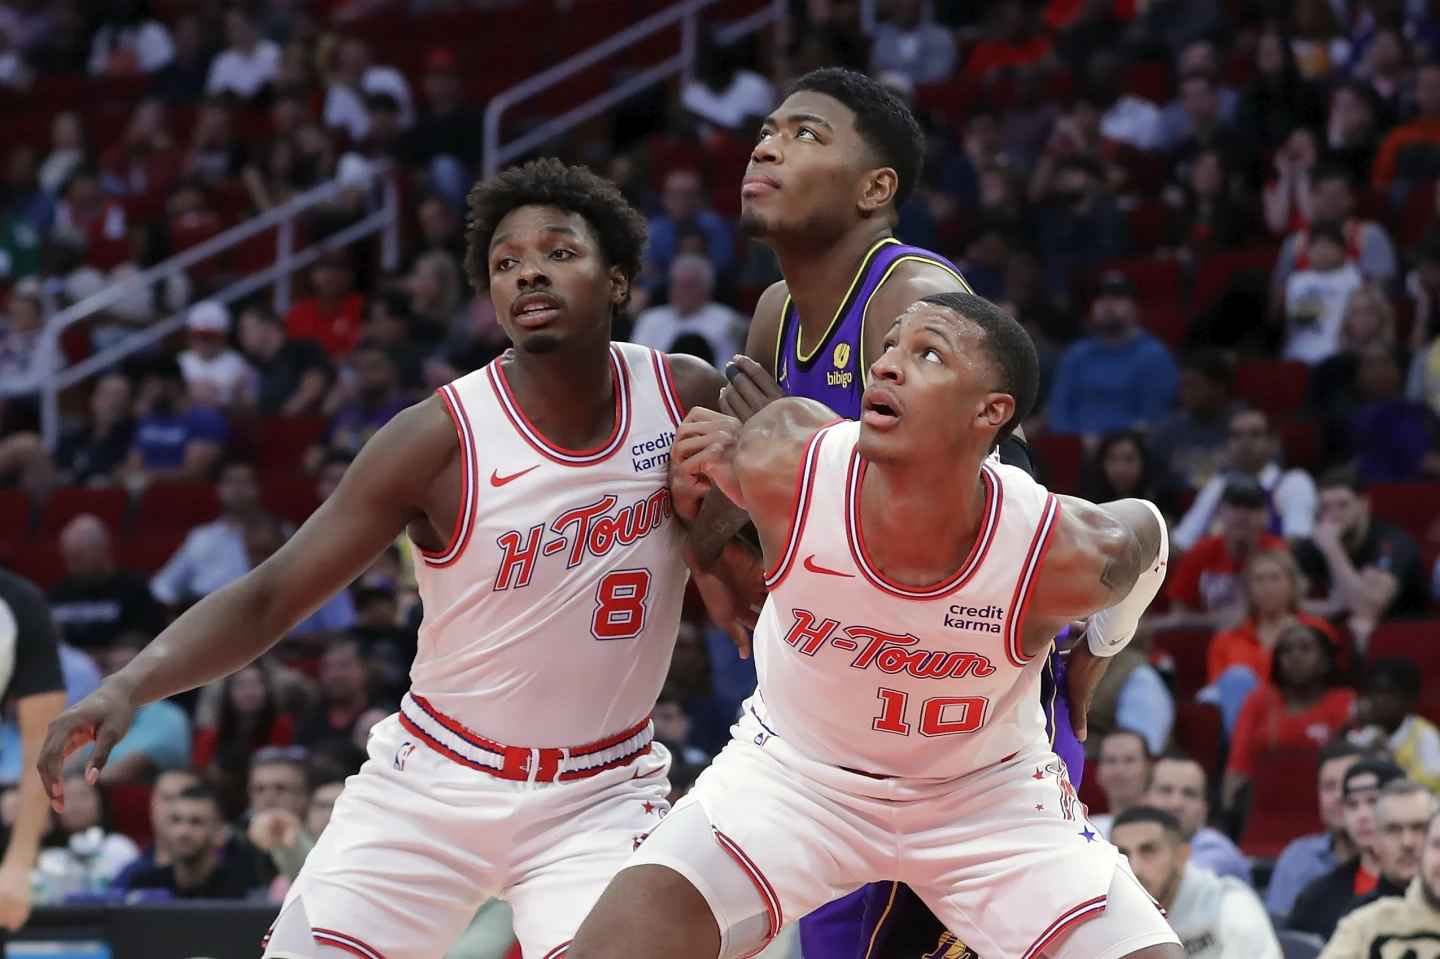 During the first half of an NBA basketball game Wednesday, Nov. 8, 2023, in Houston, Los Angeles Lakers player Rui Hachimura, center, is blocked out on a free throw by Houston Rockets forwards Jae'Sean Tate (8) and Jabar Smith Jr. (10). (Photo by Michael Wyke)